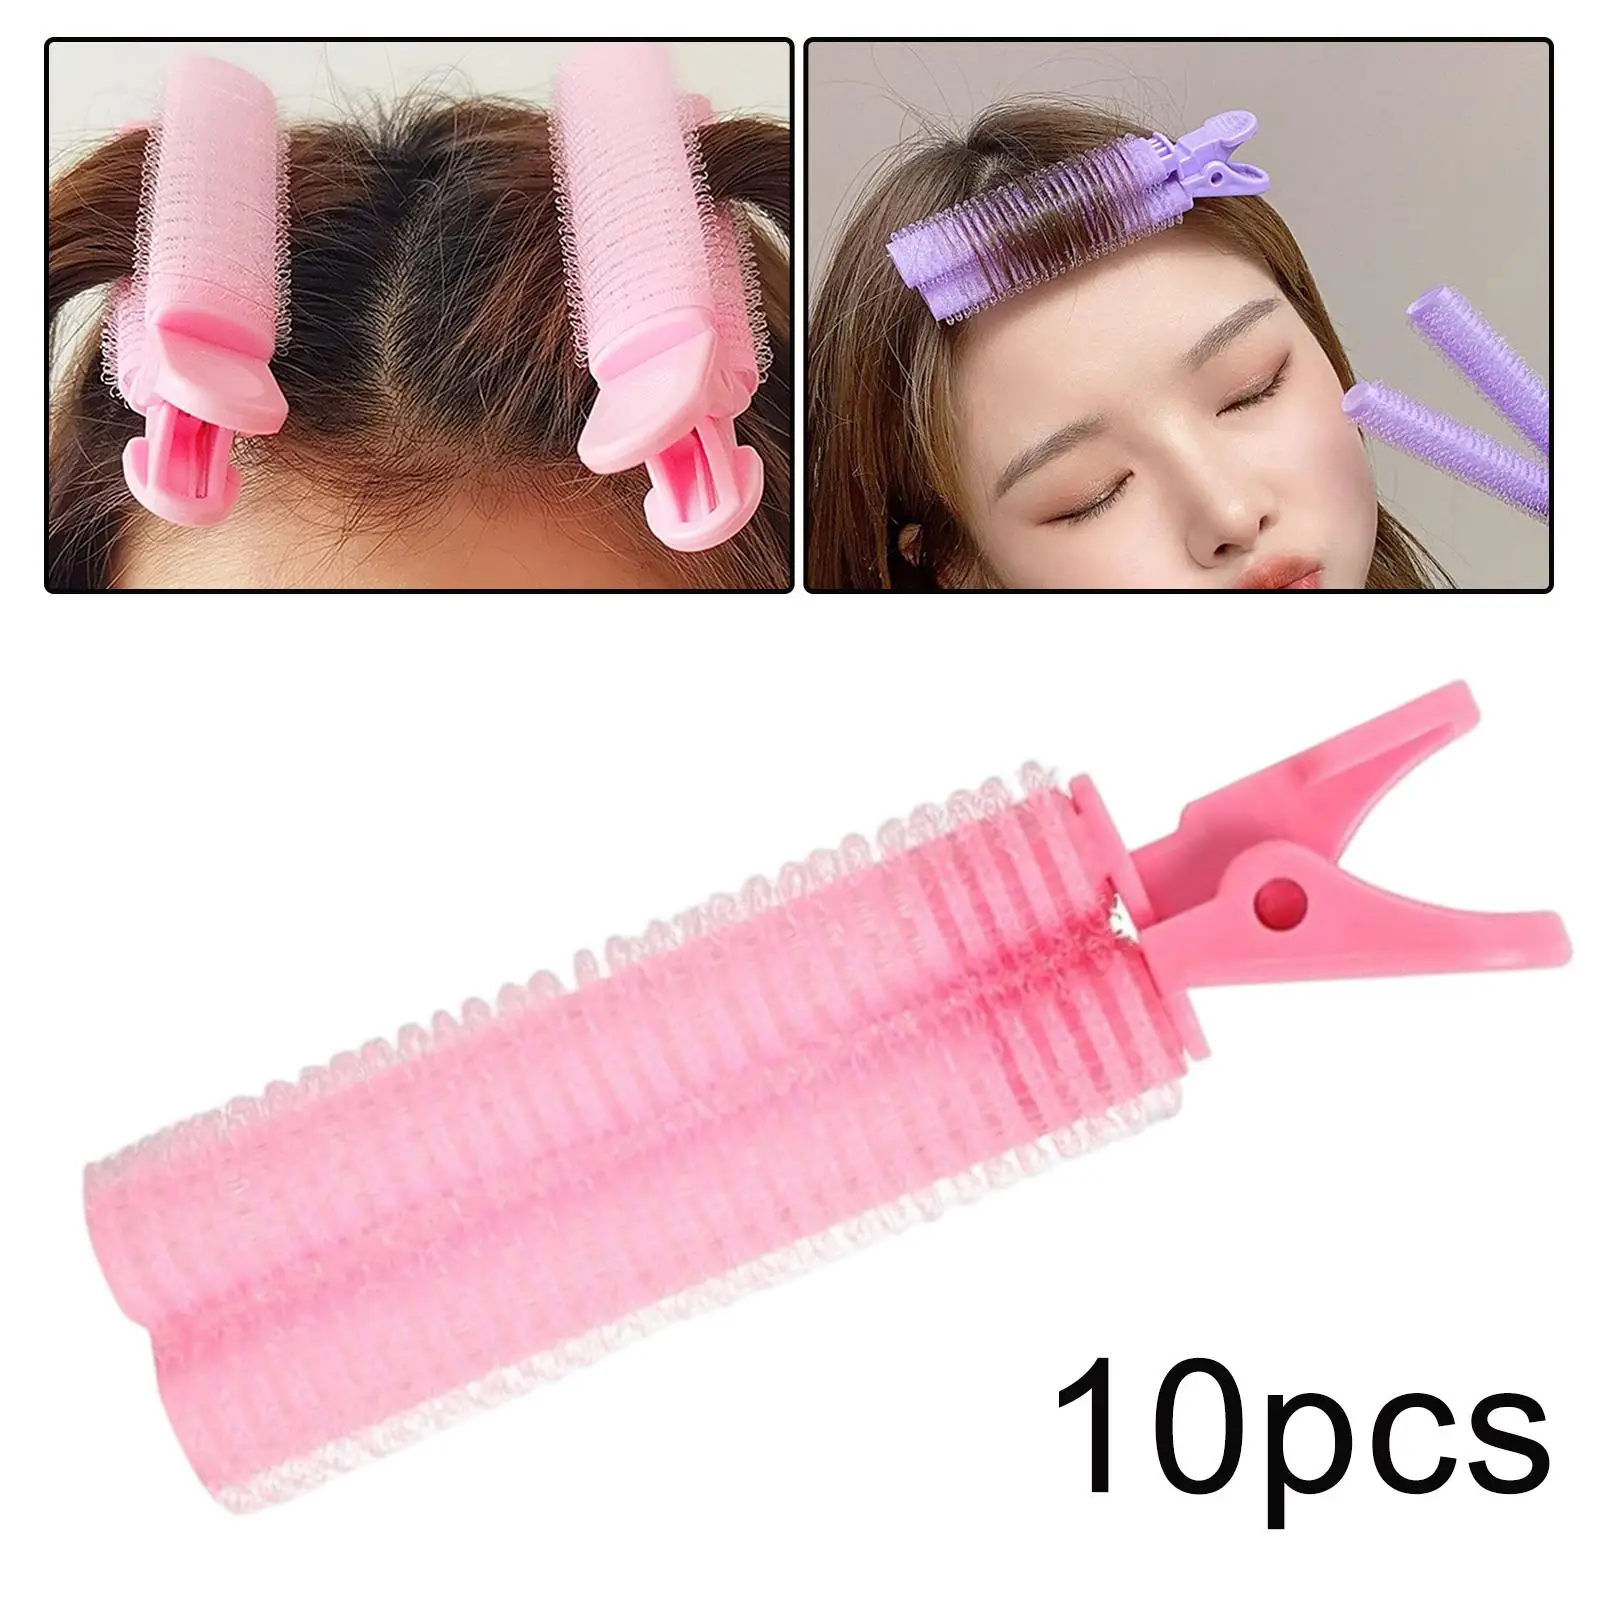 10x Hair Bangs Curling Clips Firmly Fixed Reusable Hair Curler Clips Reusable Hair Roller for DIY Hair Styling Girls Lazy People